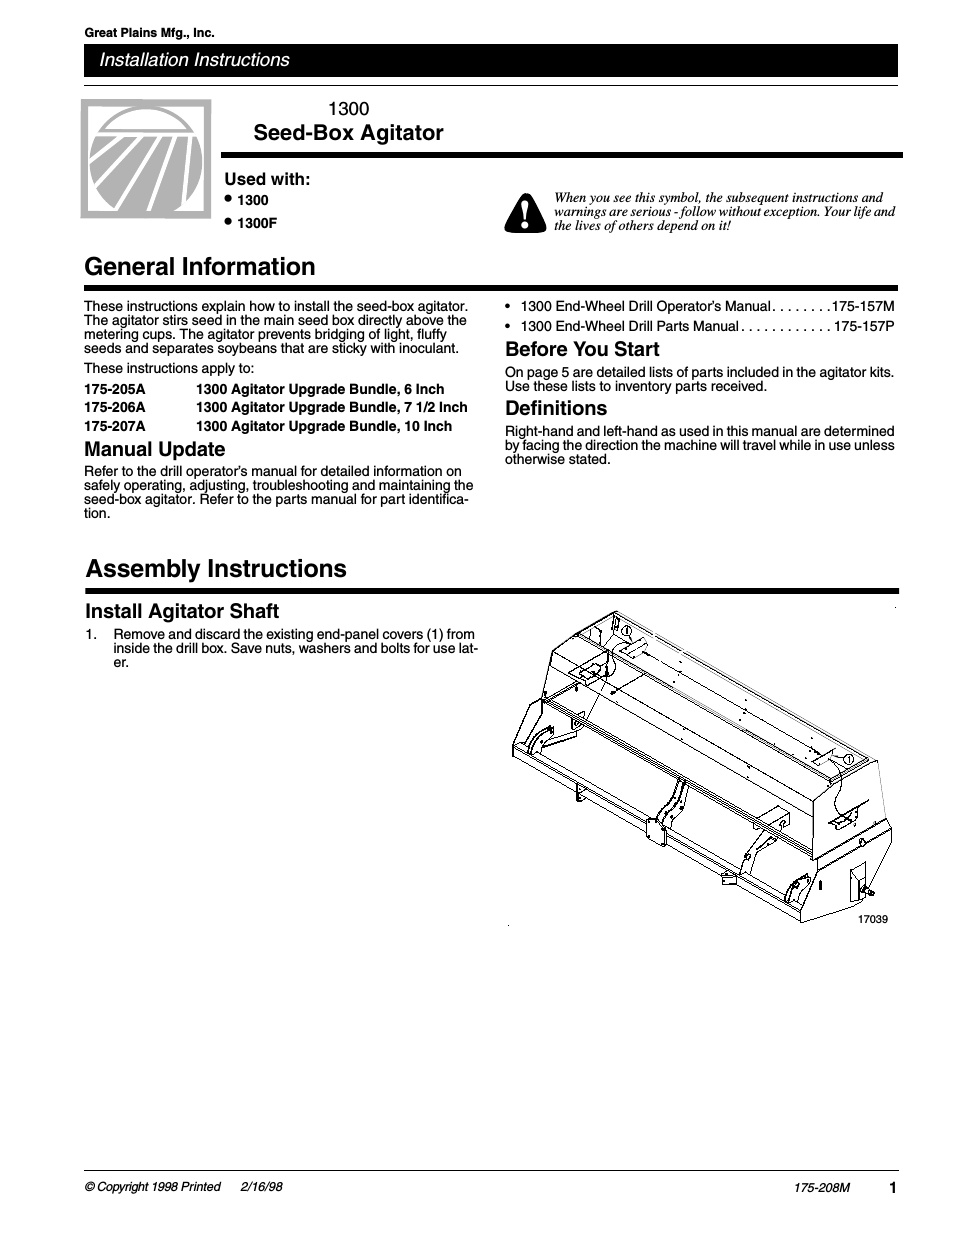 1300 Seed-Box Assembly Instructions